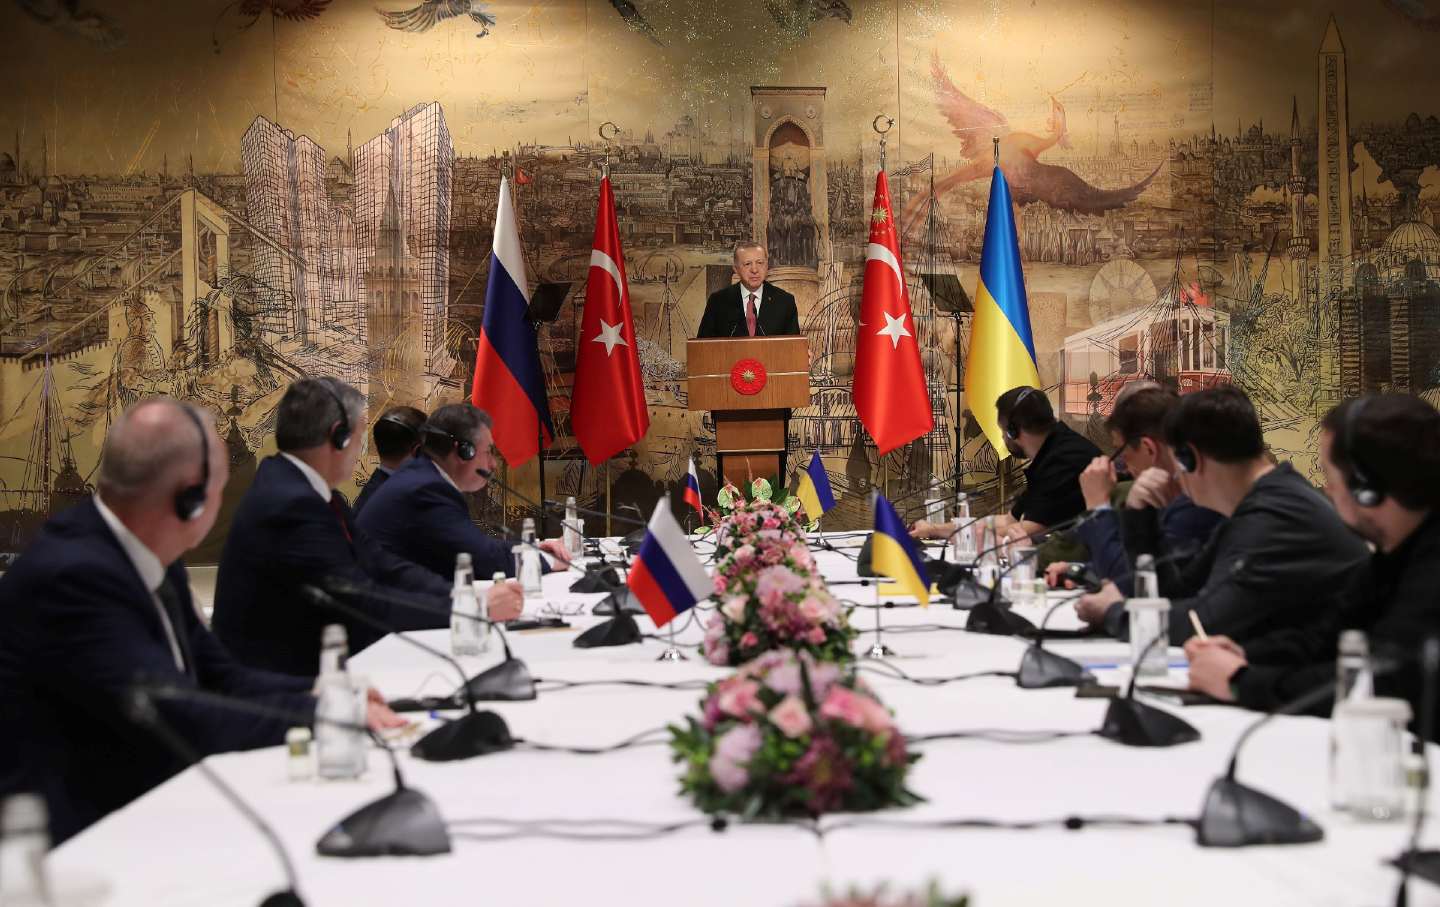 Turkish President Erdogan meets with Russian and Ukrainian delegates for peace talks in March 29, 2022